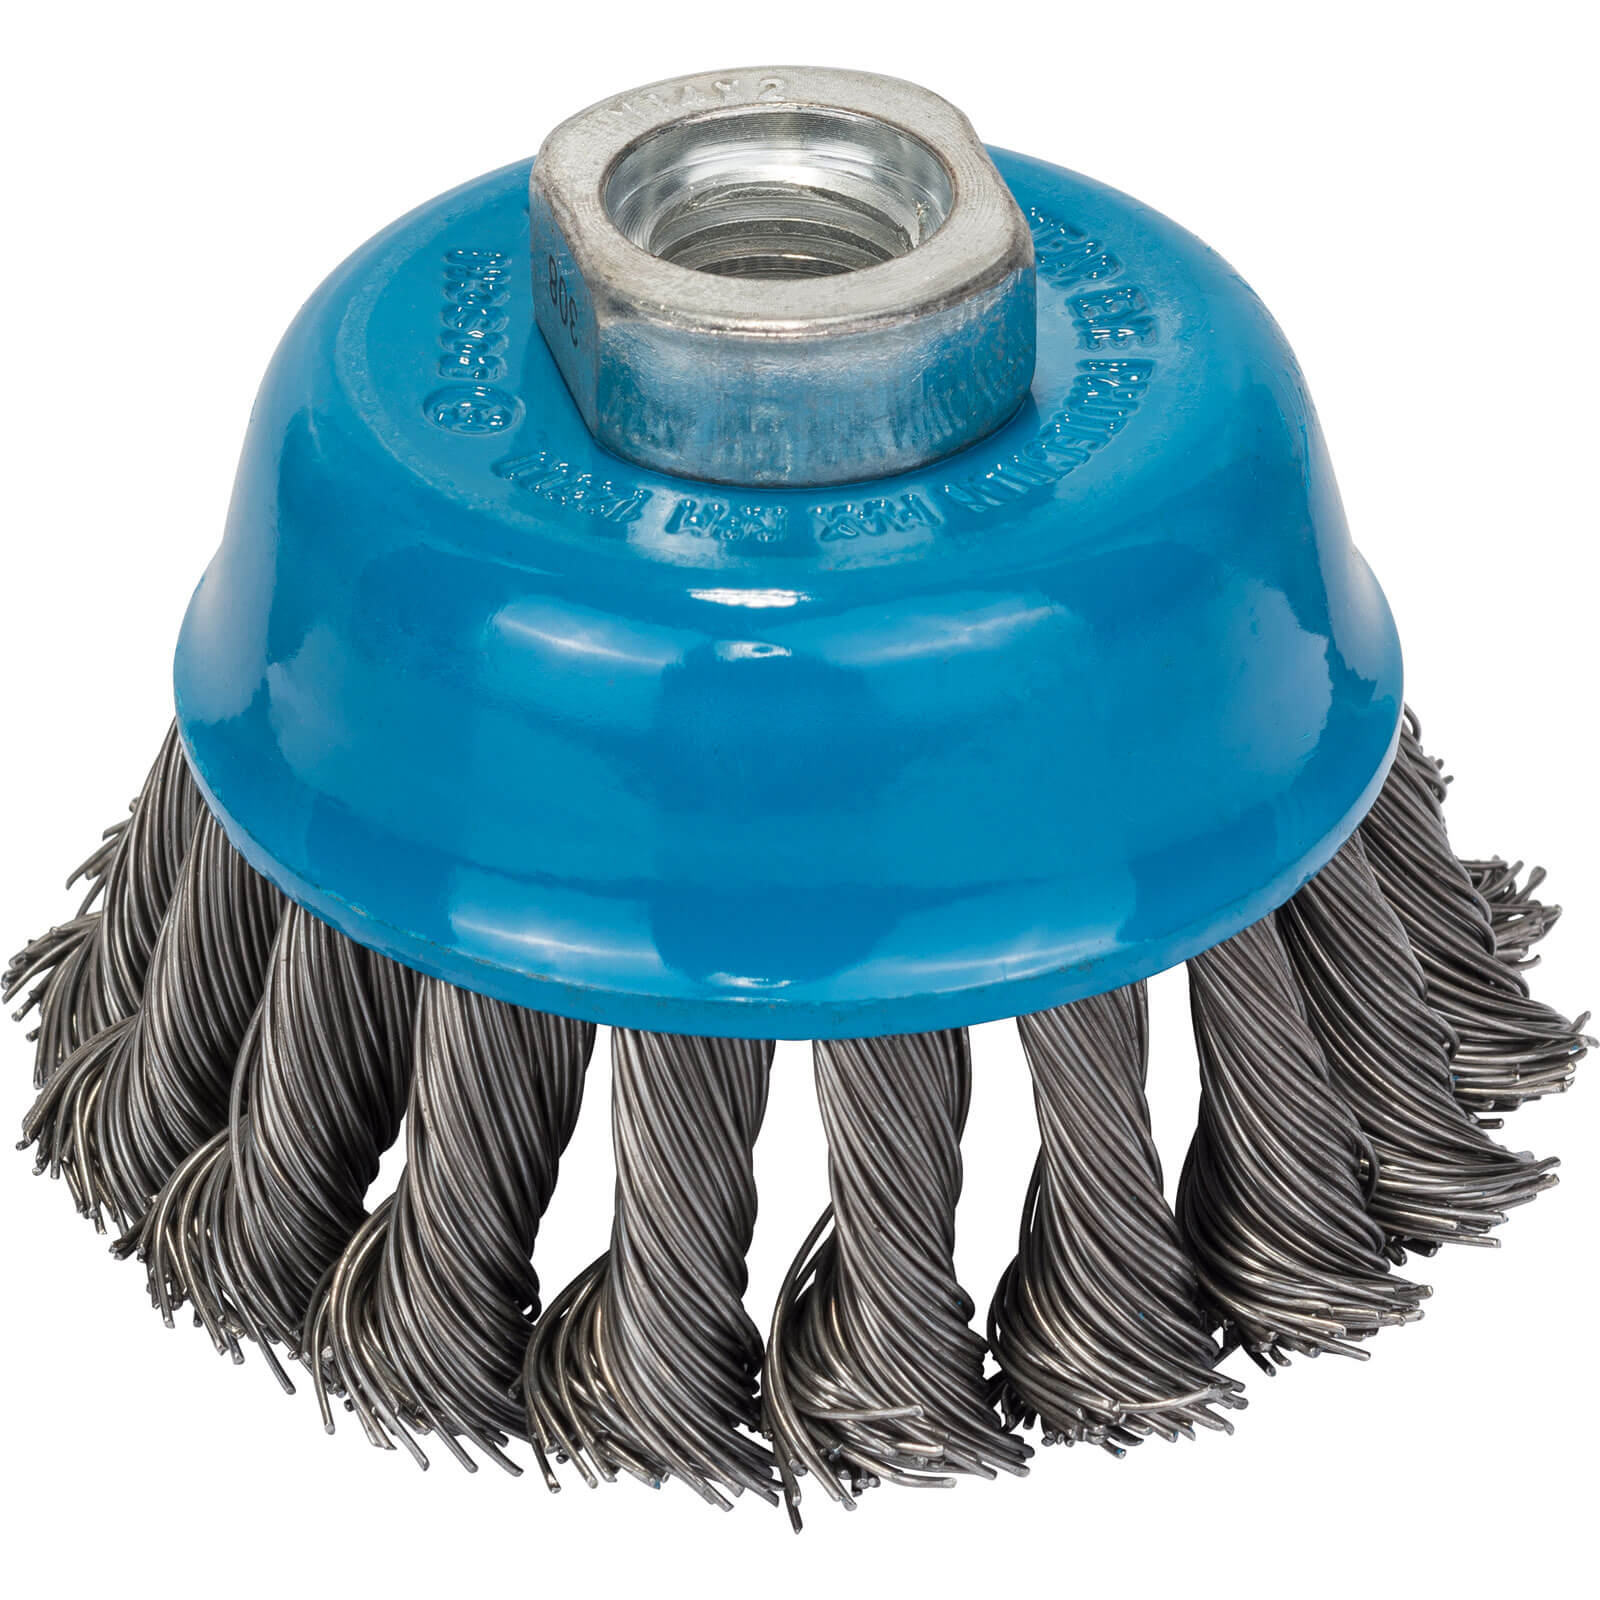 Photo of Bosch 0.5mm Knotted Steel Wire Cup Brush 70mm M14 Thread